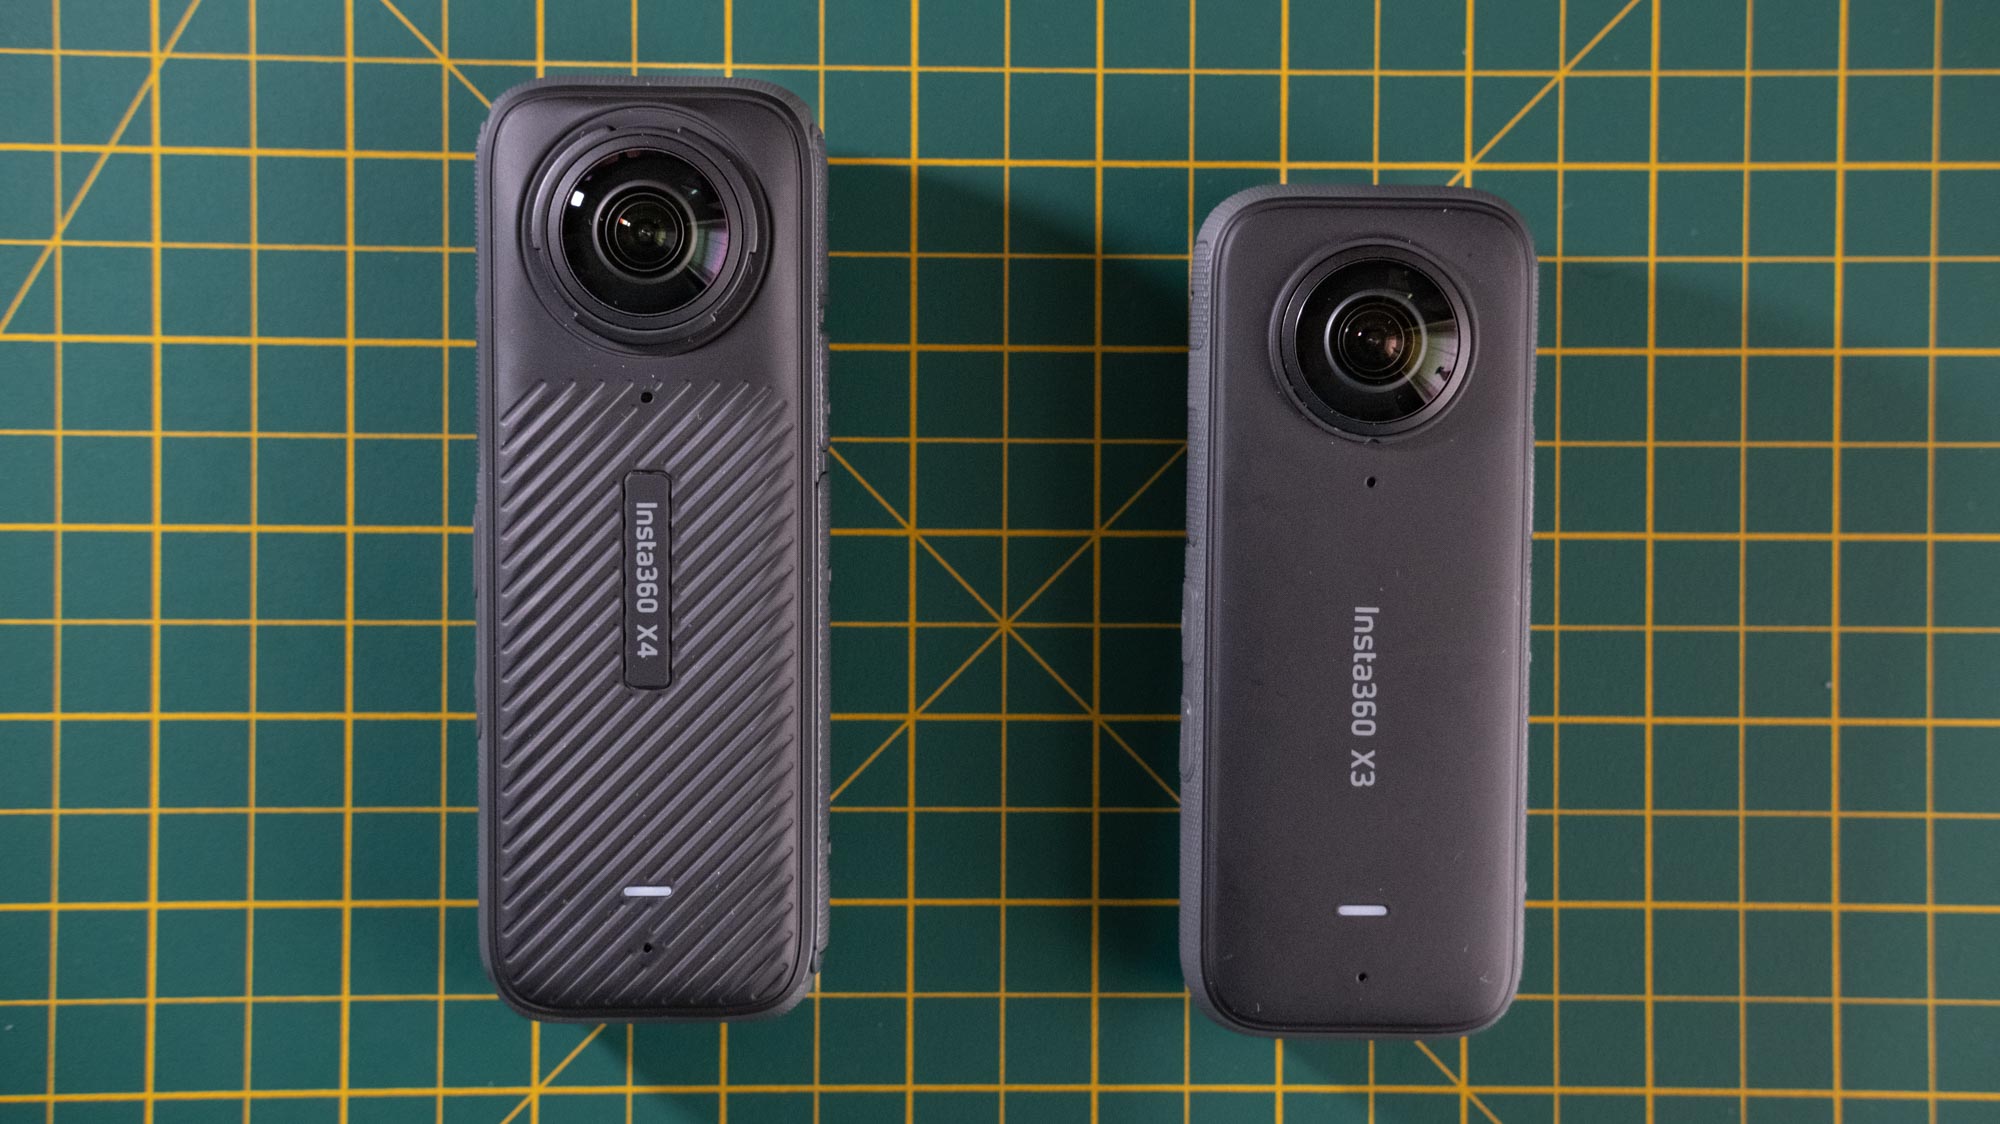 A photo of the Insta360 X4 side by side with the Insta360 X3 on a cutting mat